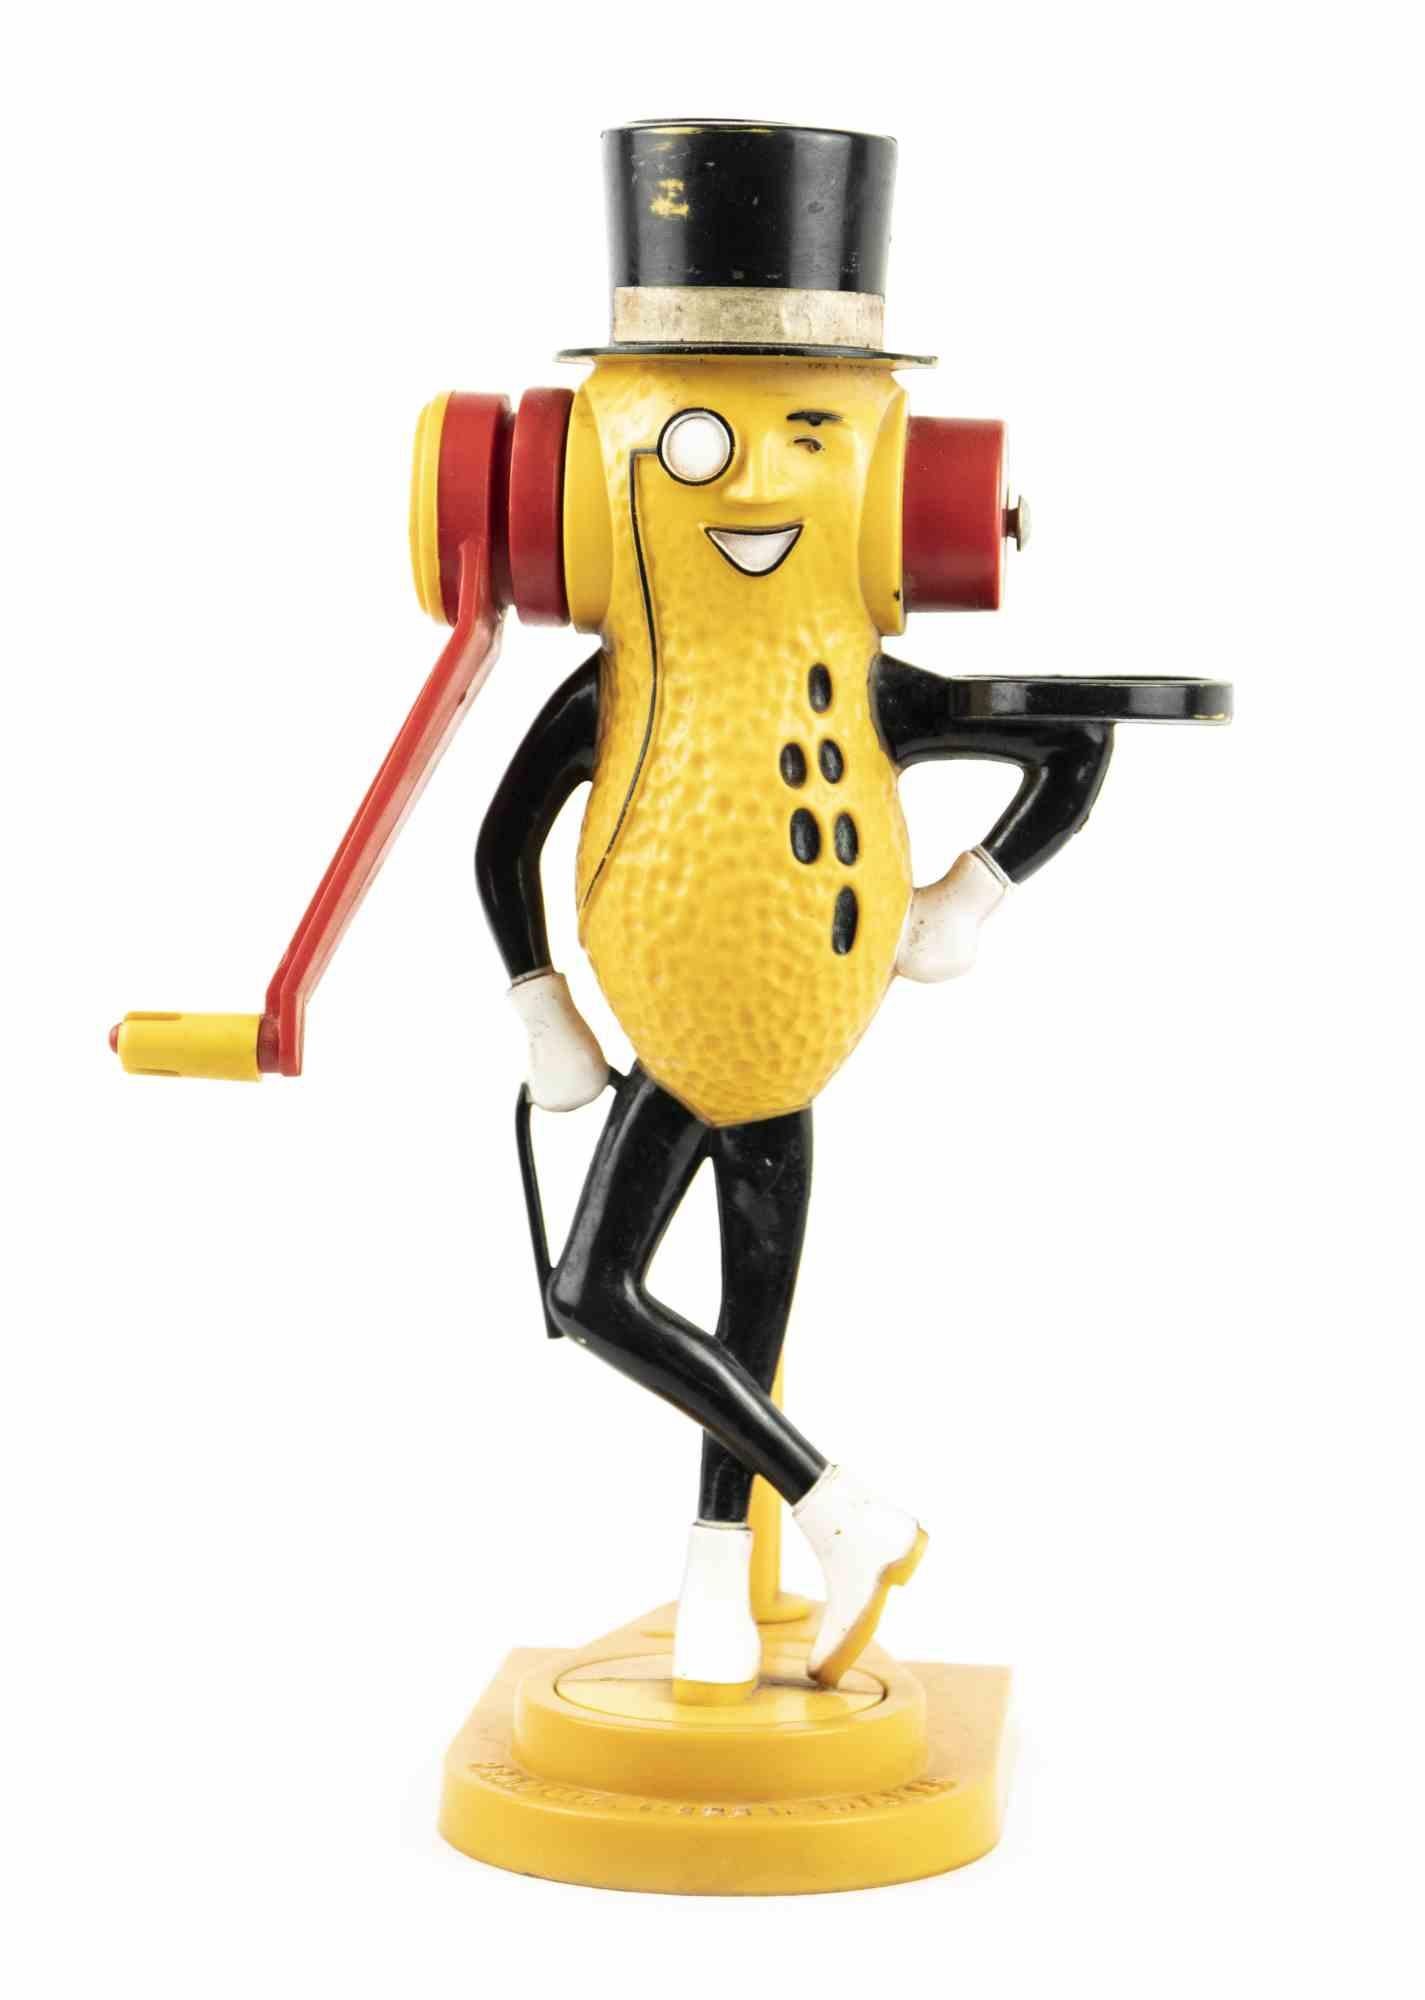 Mr.Peanut - vintage peanut butter maker is an original decorative object realized in the mid-20th century.

This vintage object was realized by Emenee and it was used as a real peanut butter.

The Emenee company was a leading manufacturer of